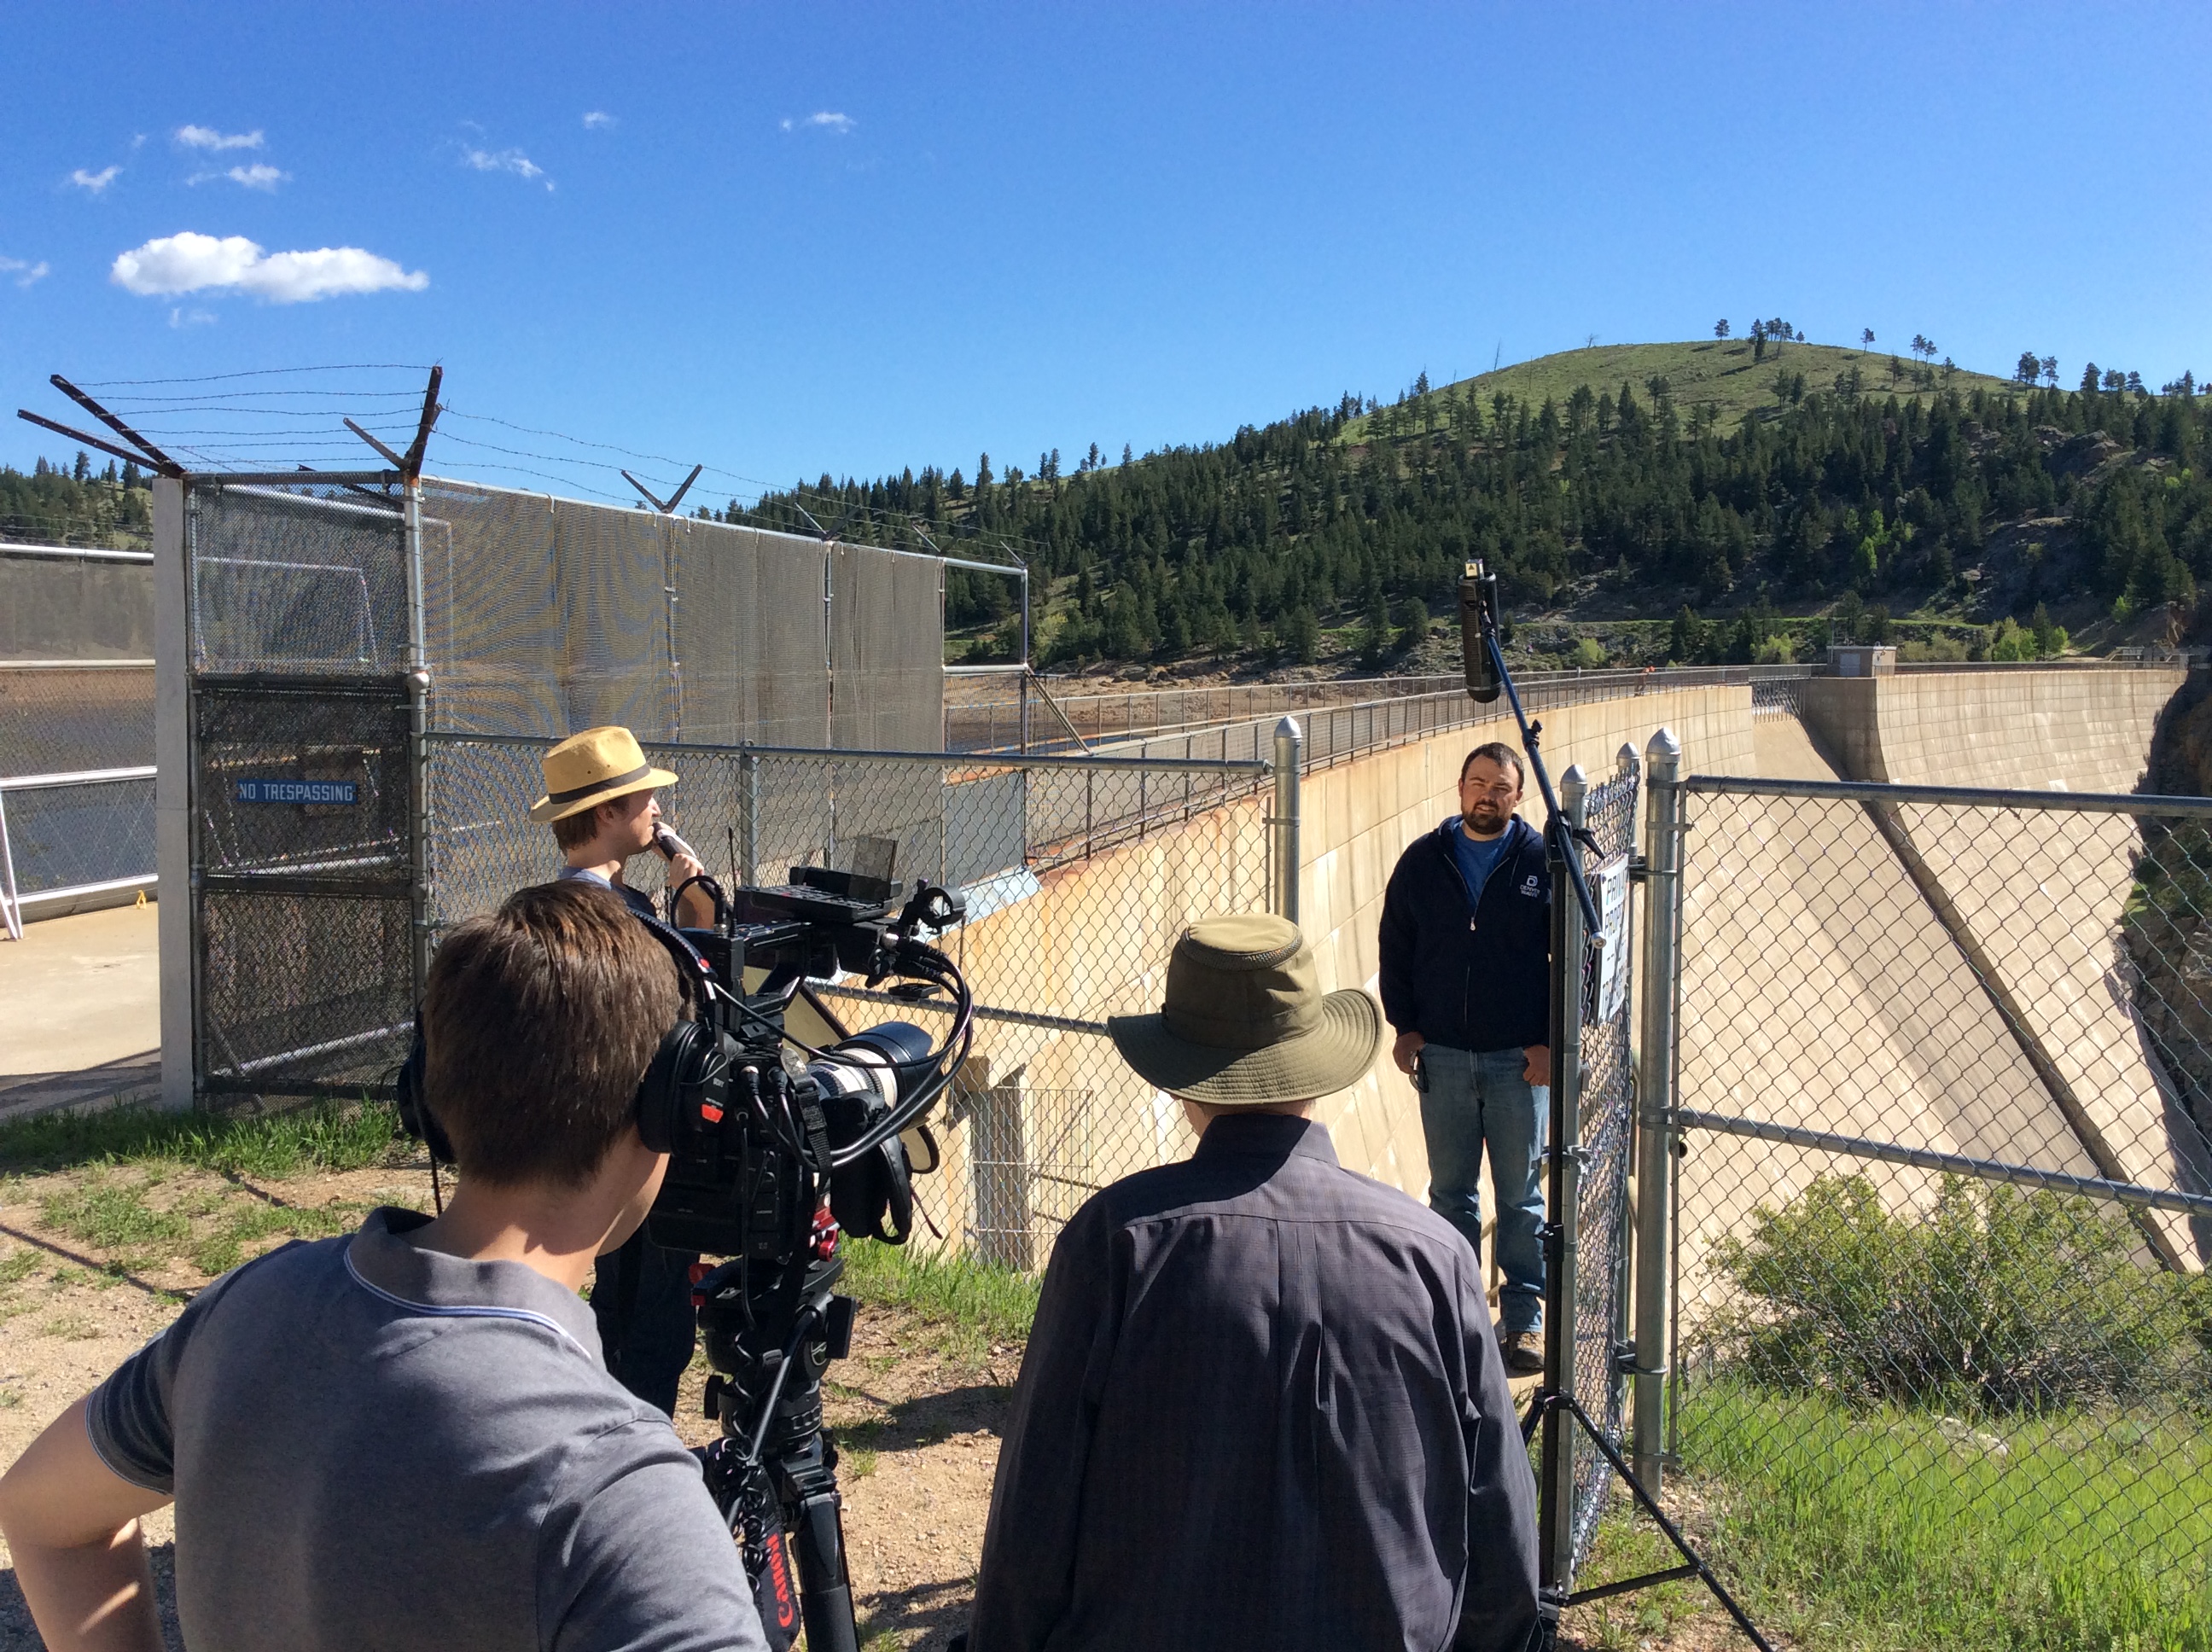 Pierre Goetz, Gross Reservoir hydro operator and caretaker, does an interview with the film crew from HaveyPro Cinema, (from left) Nathan Church, partner, editor and creative director, Zach Andrews (in hat on the left), assistant editor and camera operator, and Jim Havey (in hat on the right), owner, producer and director. 